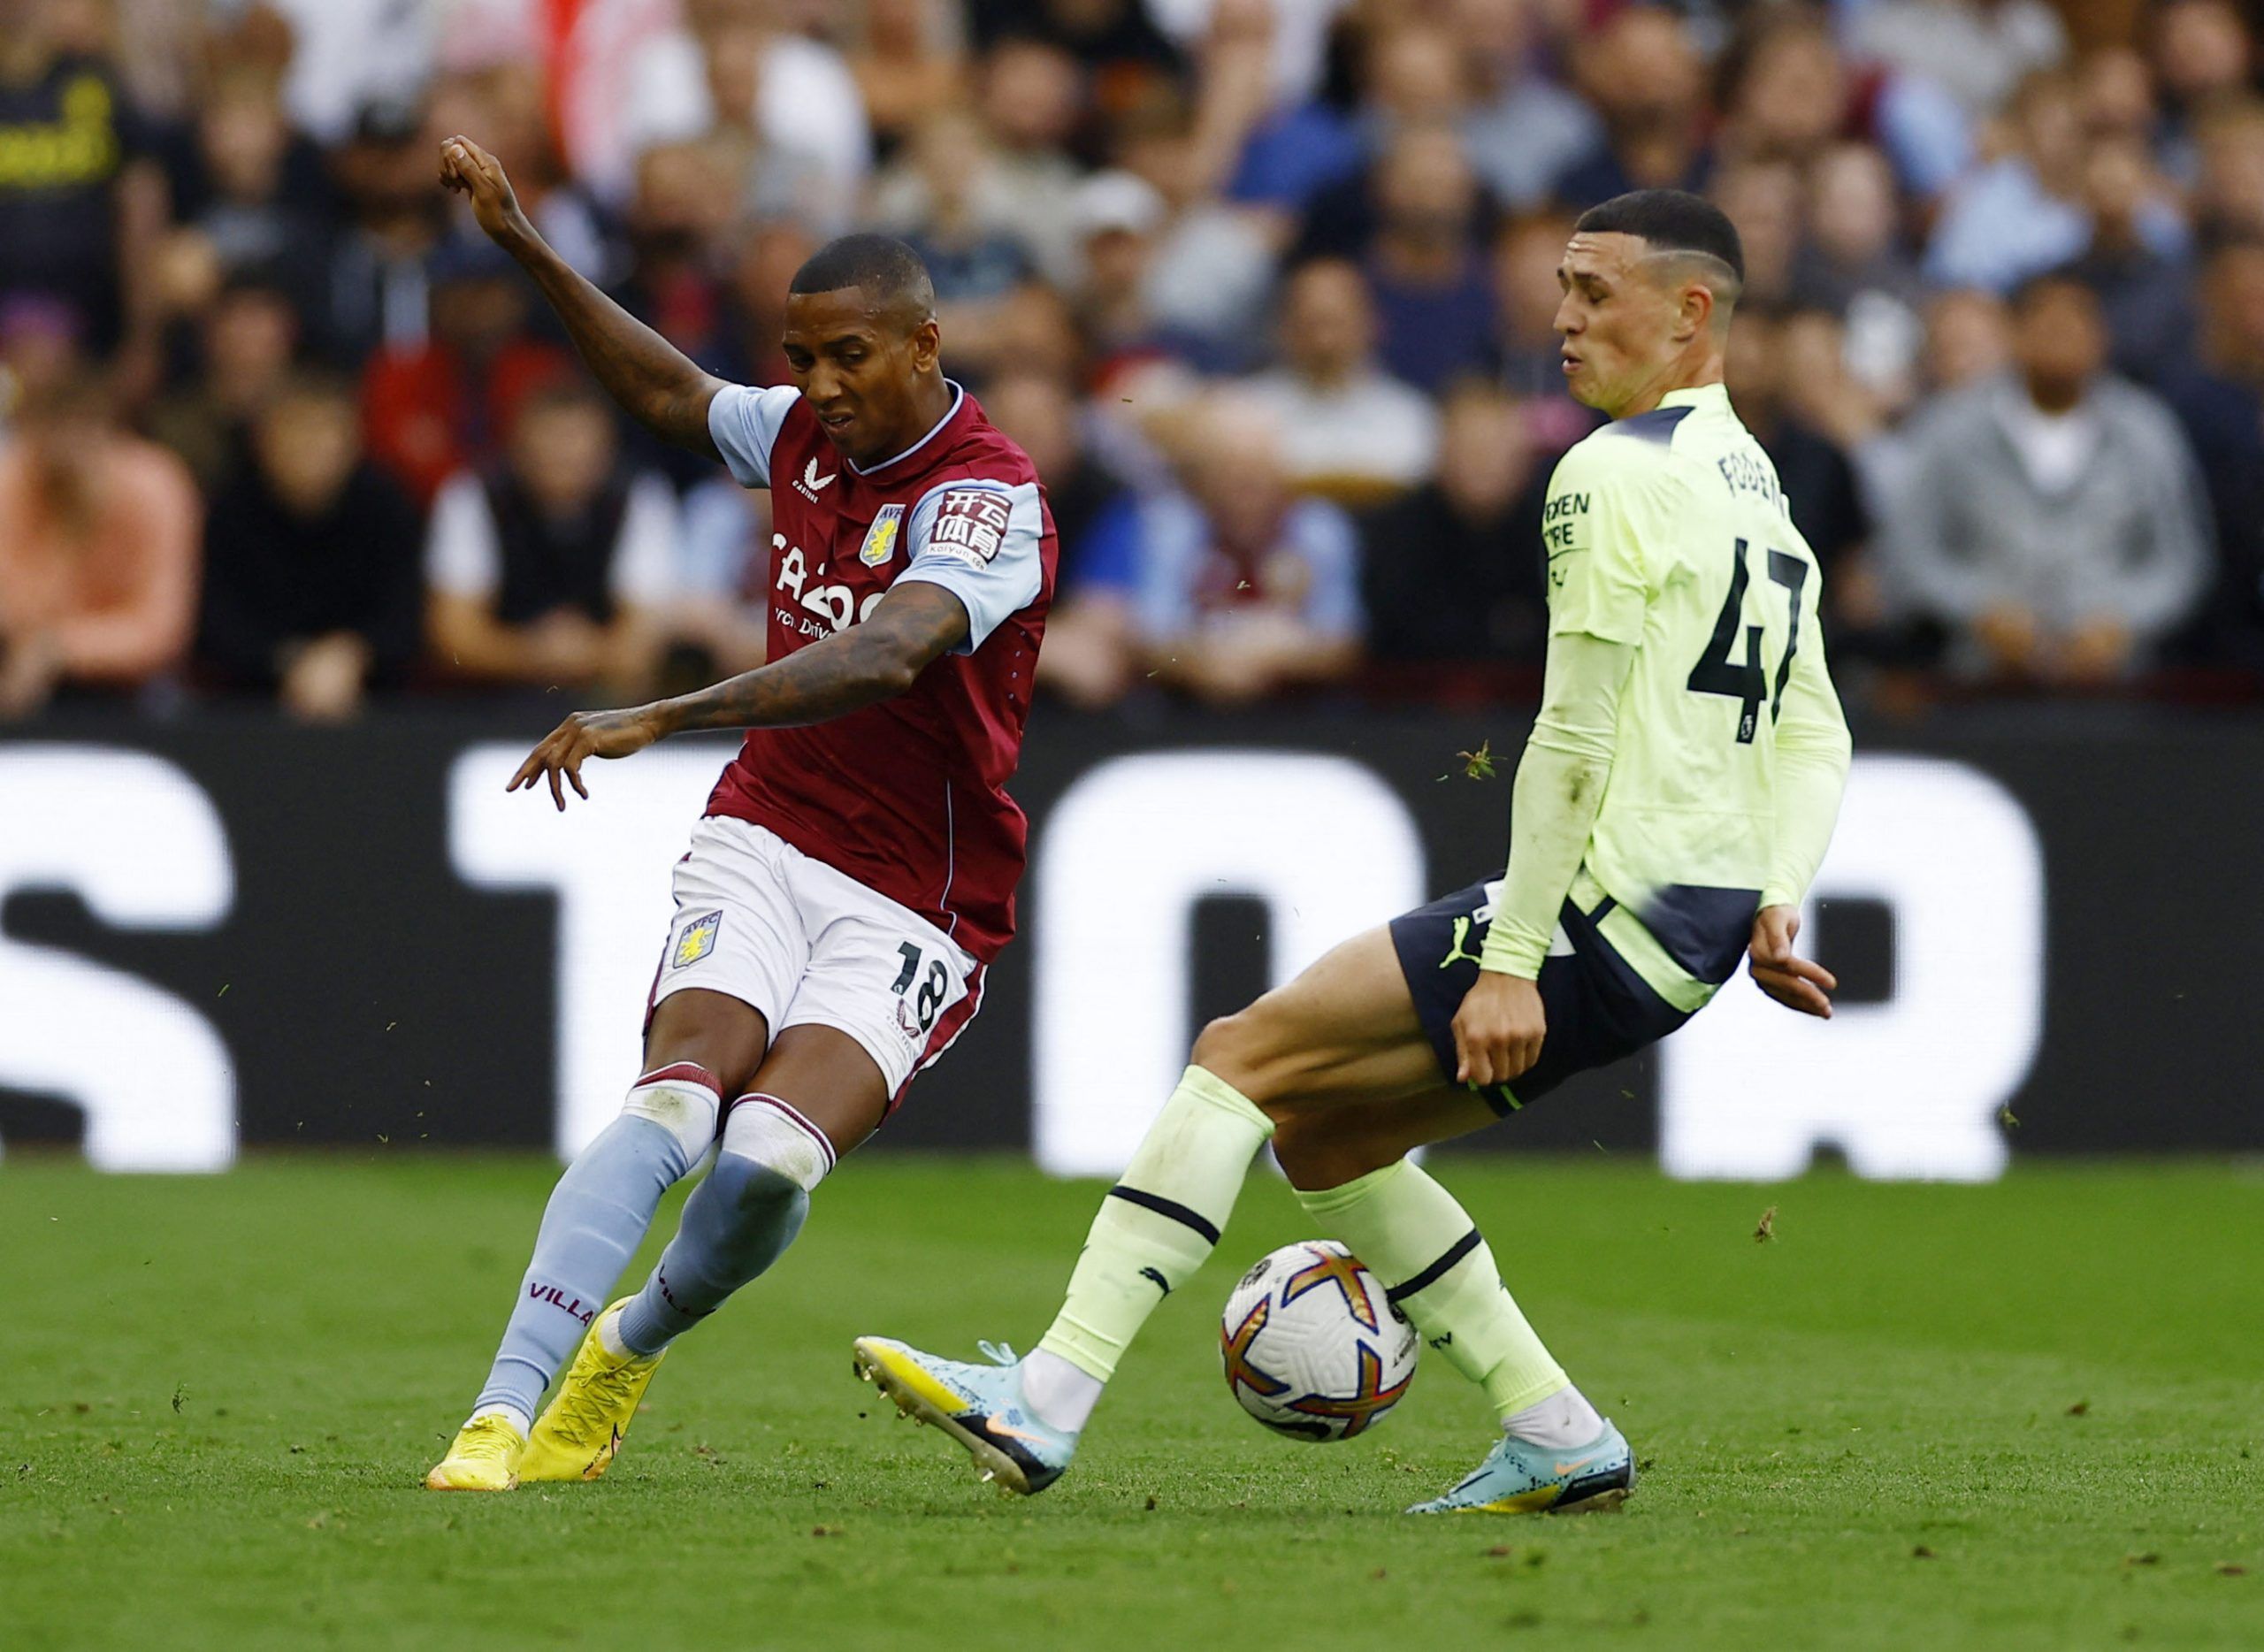 Soccer Football - Premier League - Aston Villa v Manchester City - Villa Park, Birmingham, Britain - September 3, 2022 Aston Villa's Ashley Young in action with Manchester City's Phil Foden Action Images via Reuters/Andrew Boyers EDITORIAL USE ONLY. No use with unauthorized audio, video, data, fixture lists, club/league logos or 'live' services. Online in-match use limited to 75 images, no video emulation. No use in betting, games or single club /league/player publications.  Please contact your 